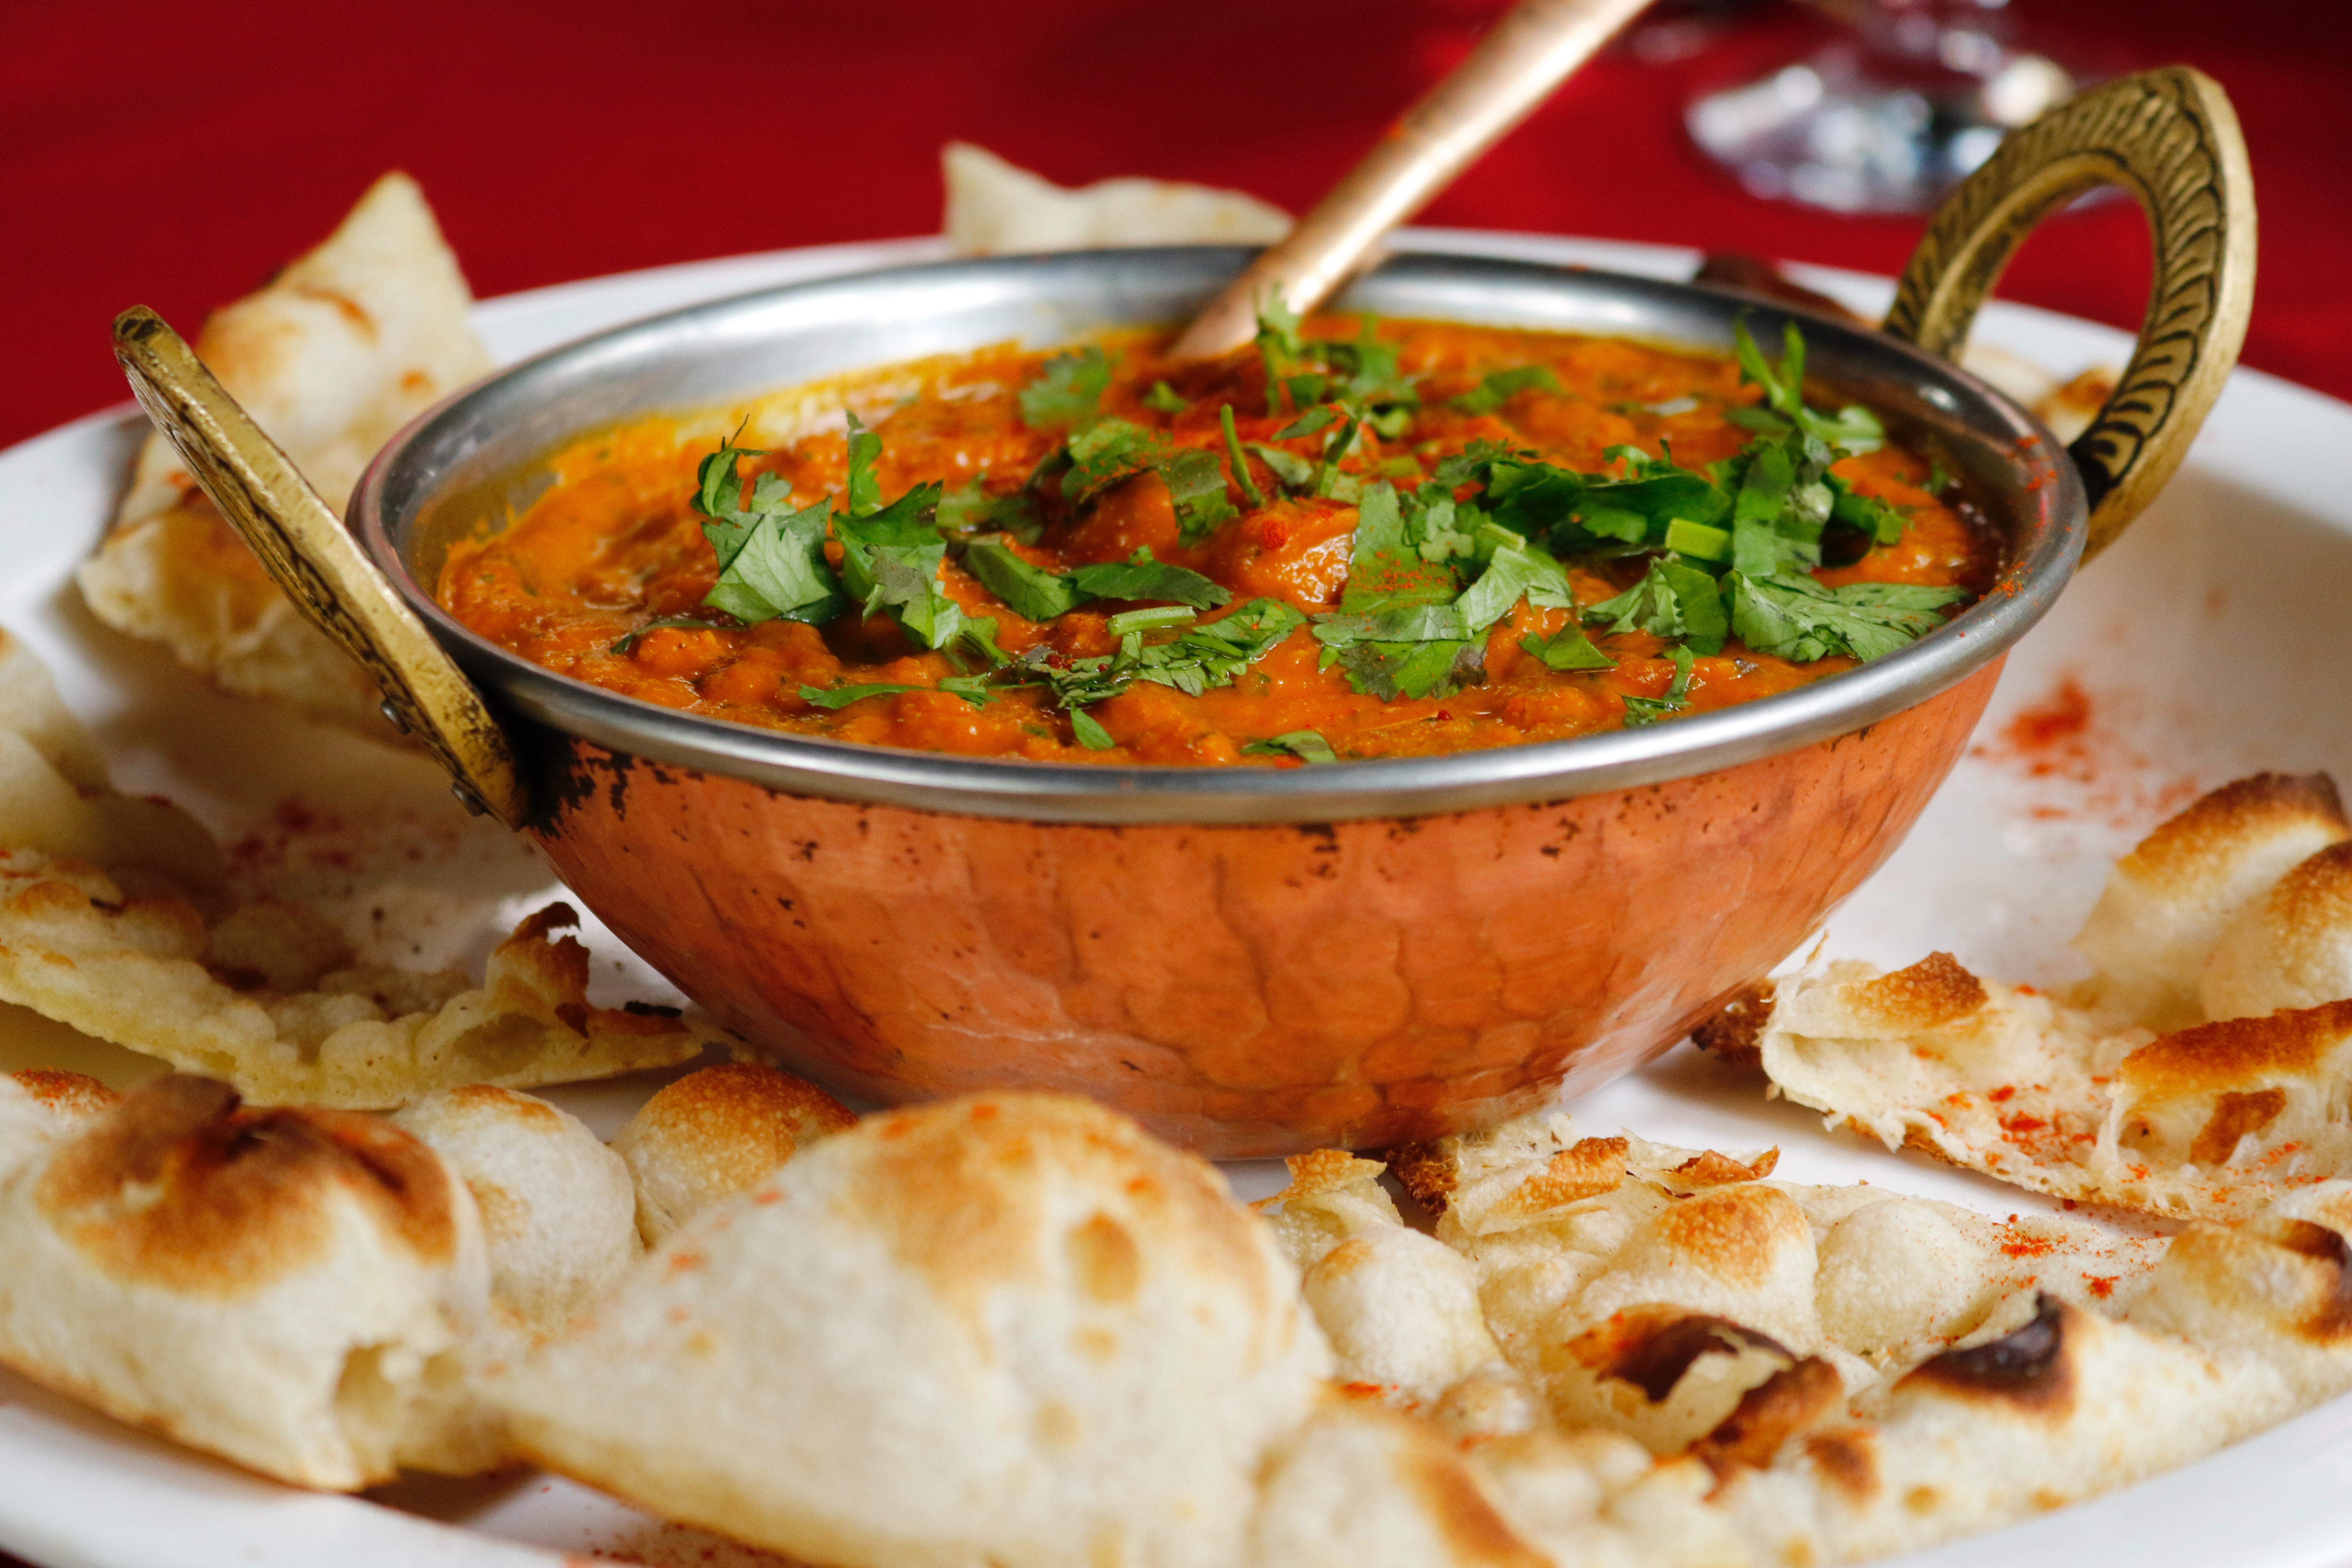 Delve Into Delicious Indian Cuisine at These Redmond Restaurants